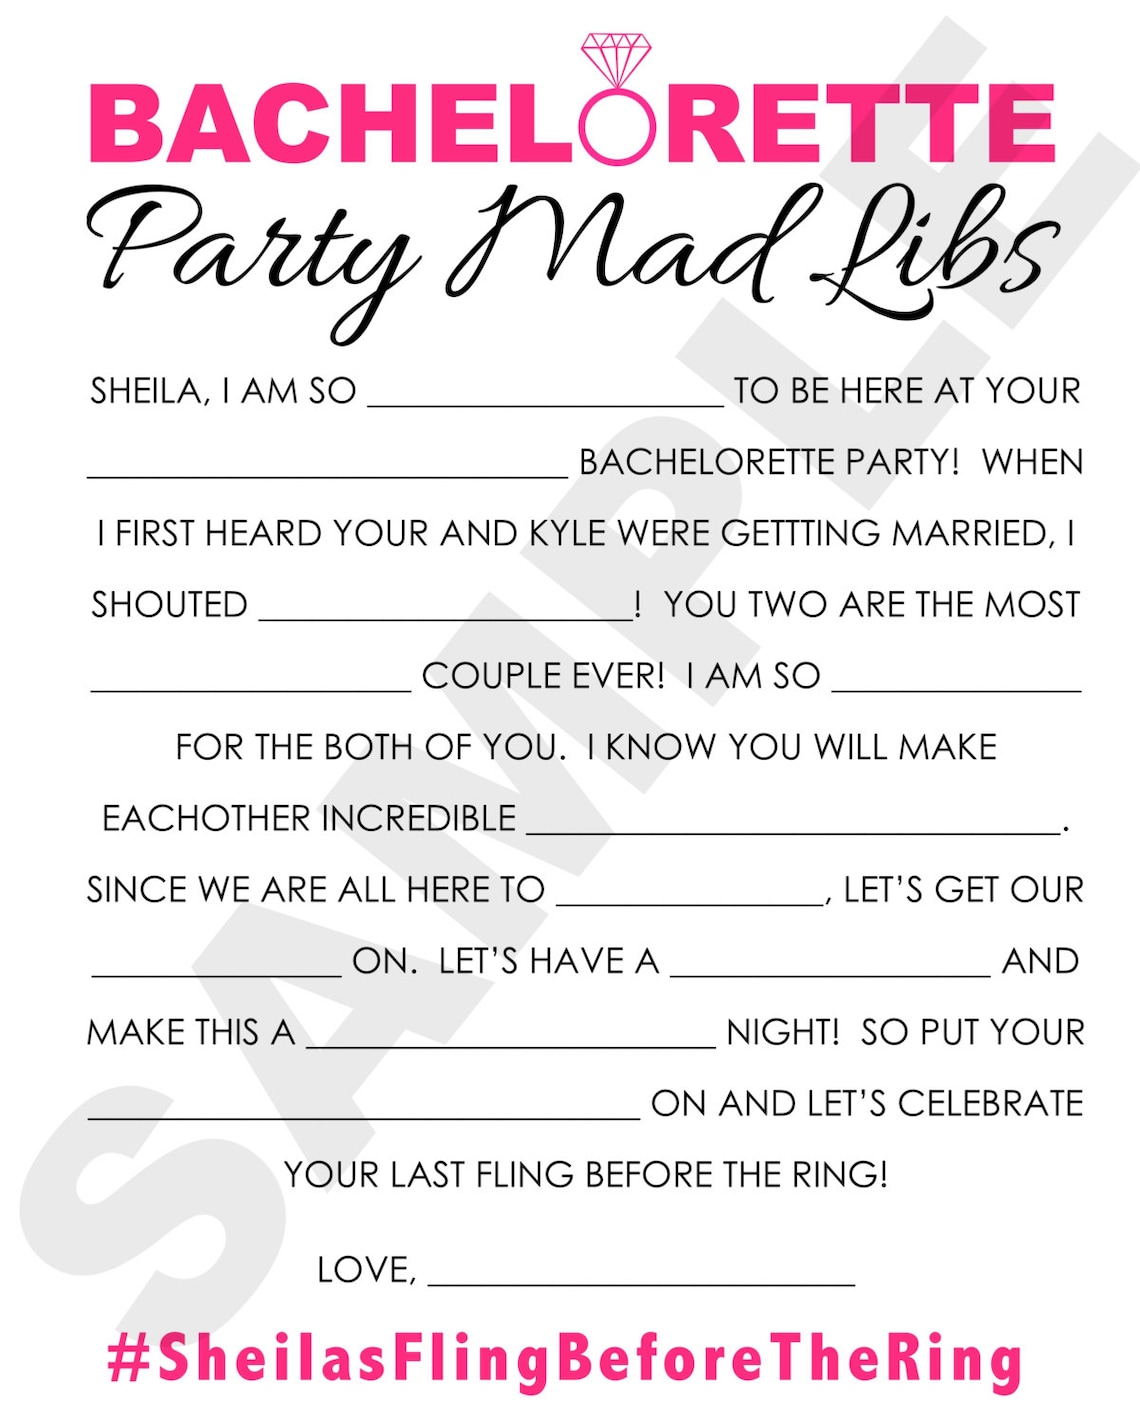 bachelorette-party-mad-libs-printable-bachelorette-party-mad-etsy